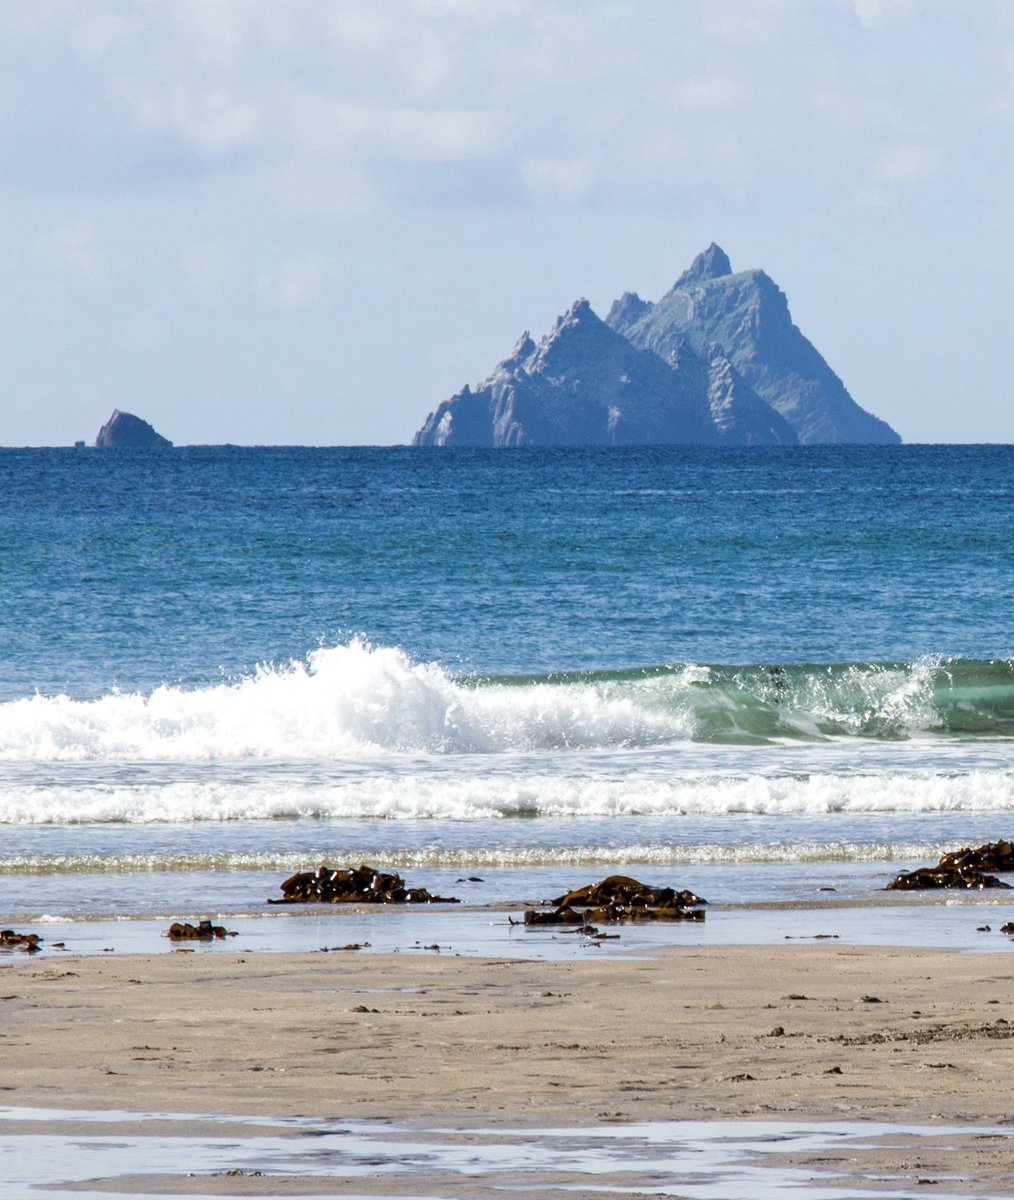 Calm and serene in St Finian’s Bay and the Mystical Skelligs in the background @wildatlanticway @WAWHour @SkelligSix18 @DiscoverIreland @DiscoverKerry_